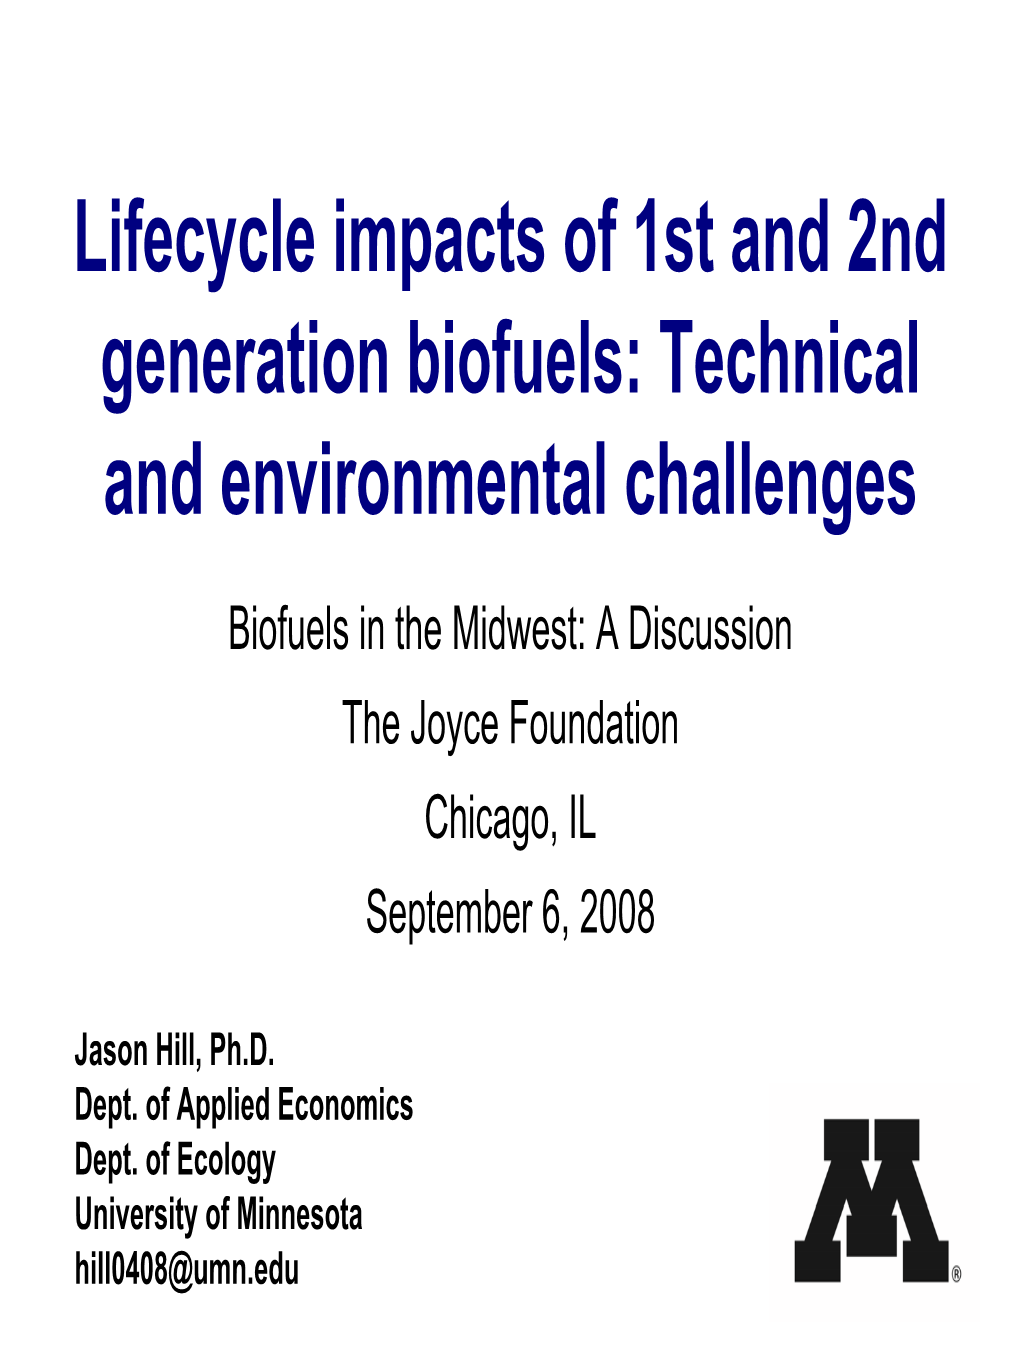 Lifecycle Impacts of 1St and 2Nd Generation Biofuels: Technical and Environmental Challenges